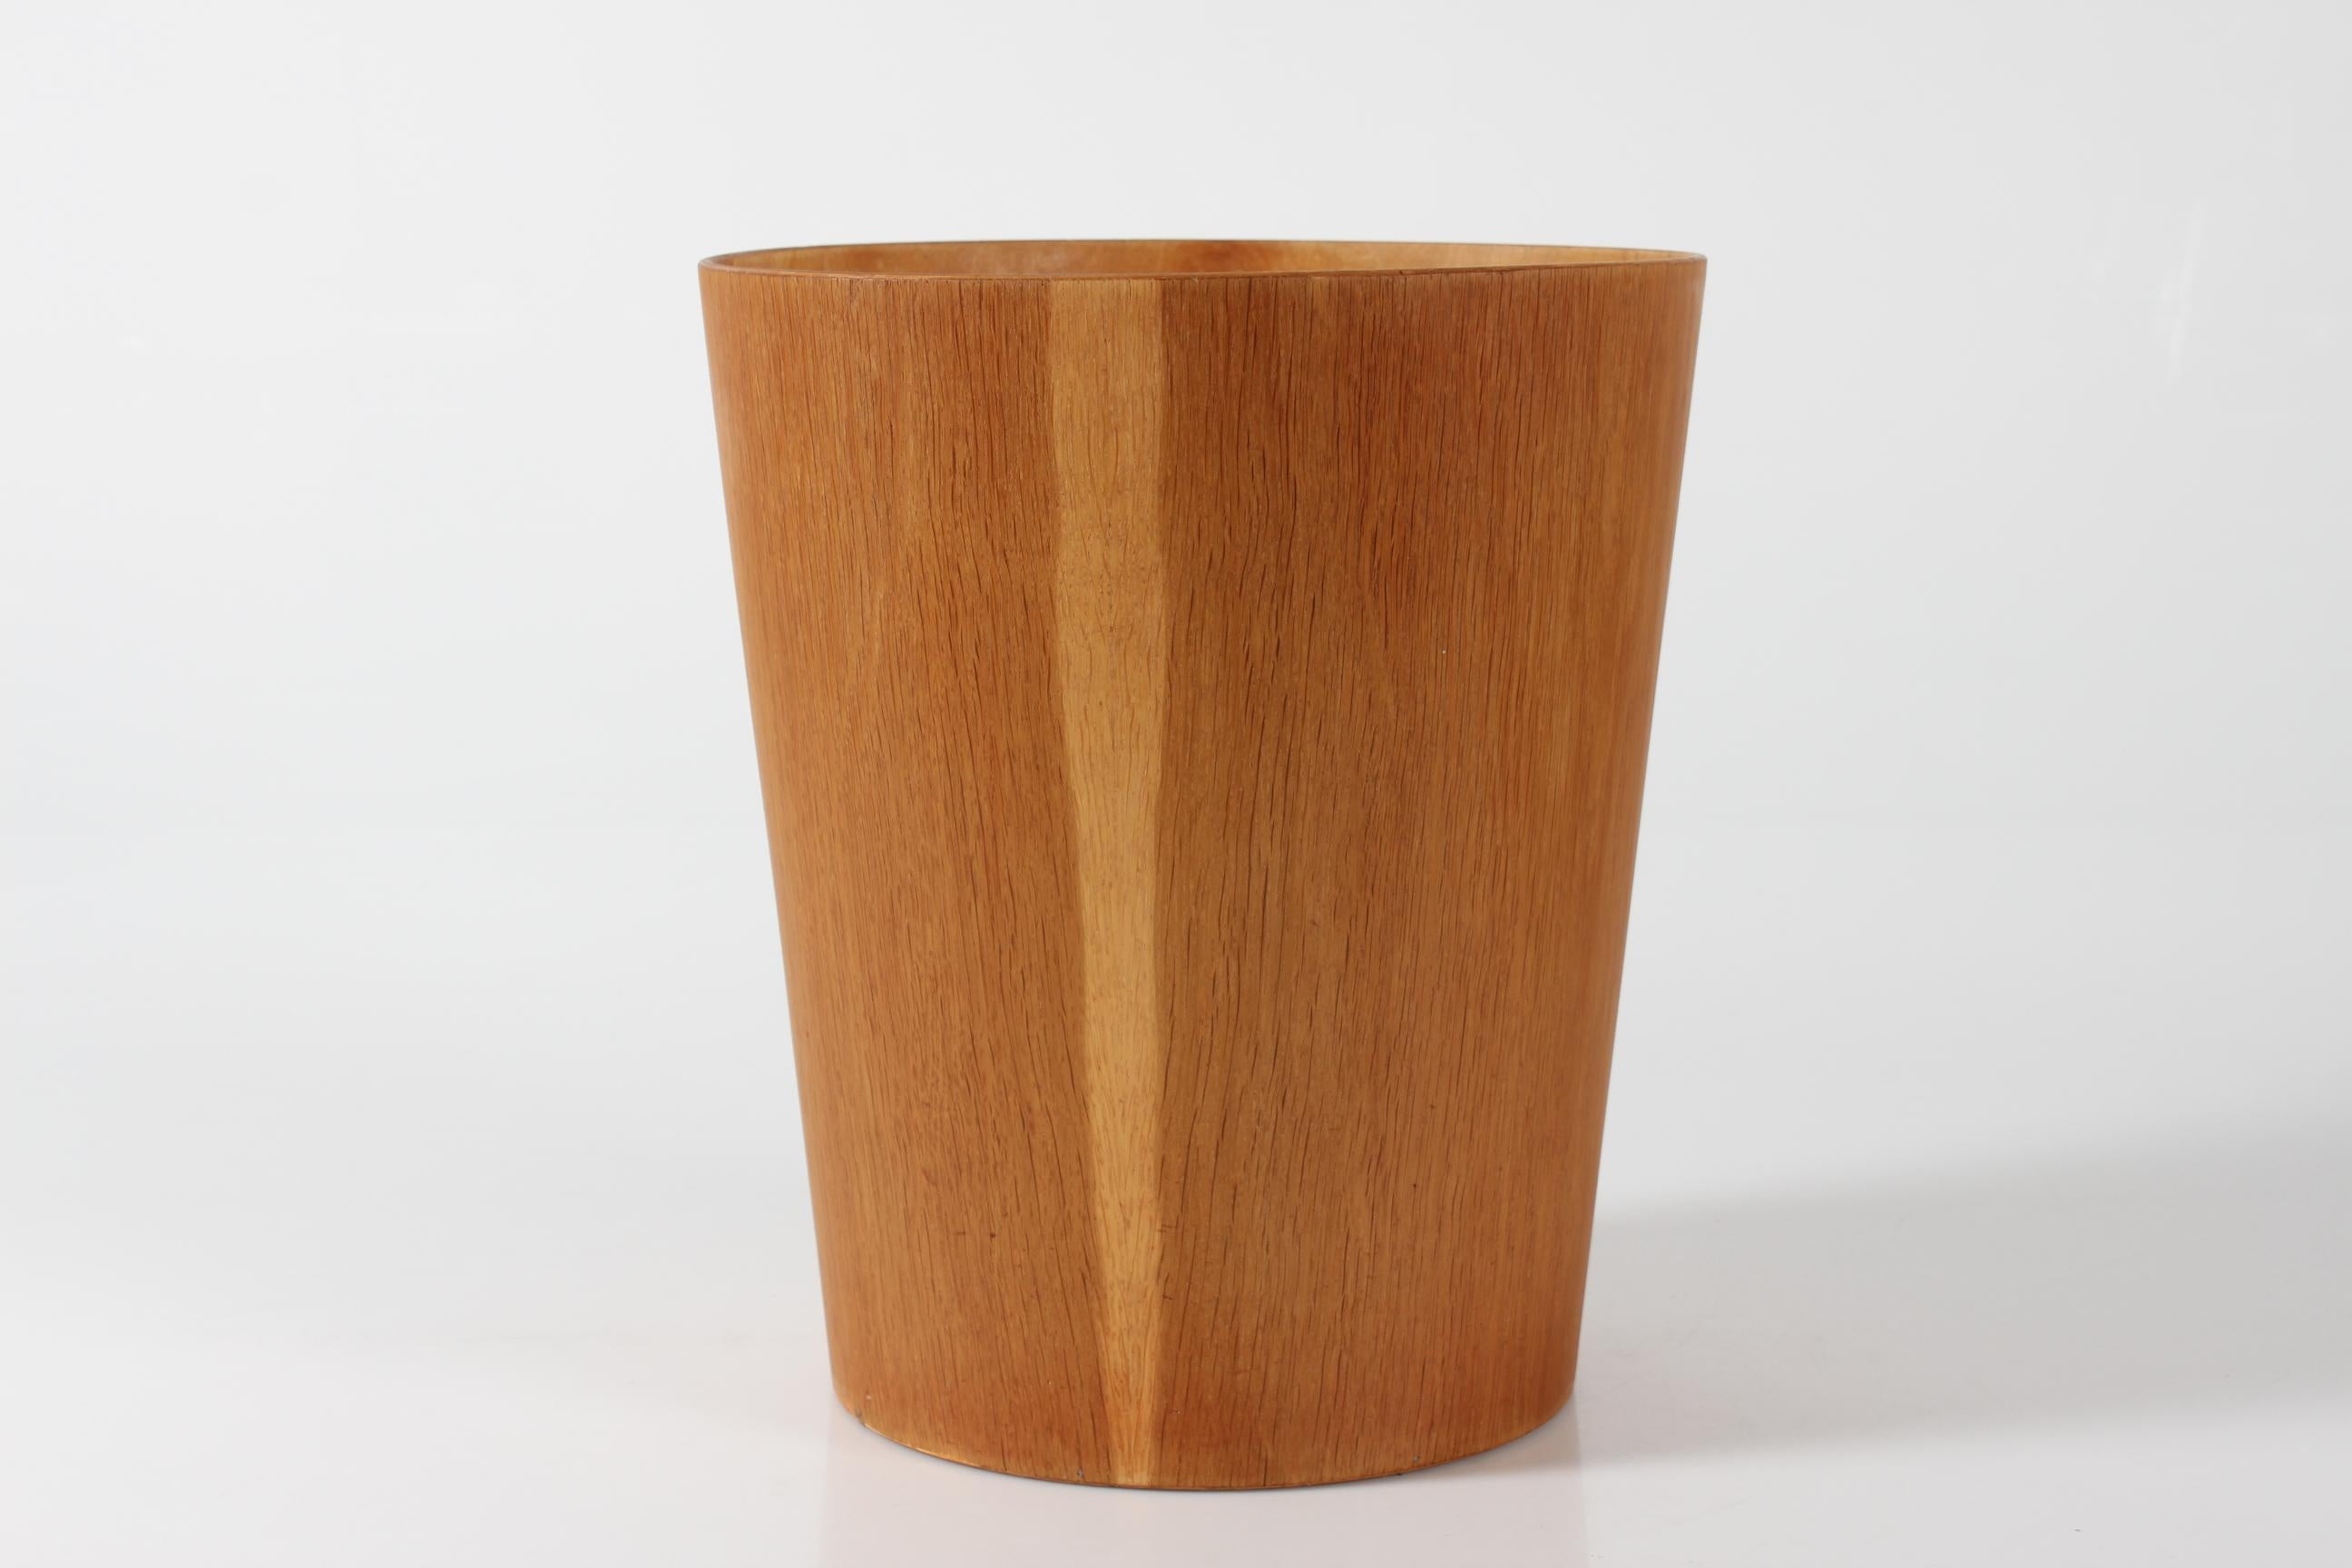 Martin Åberg wastepaper basket made by Swedish Sevex in the 1960s.
The conical basket is made of oak veneer with good warm colour patina.

Very nice vintage condition 
